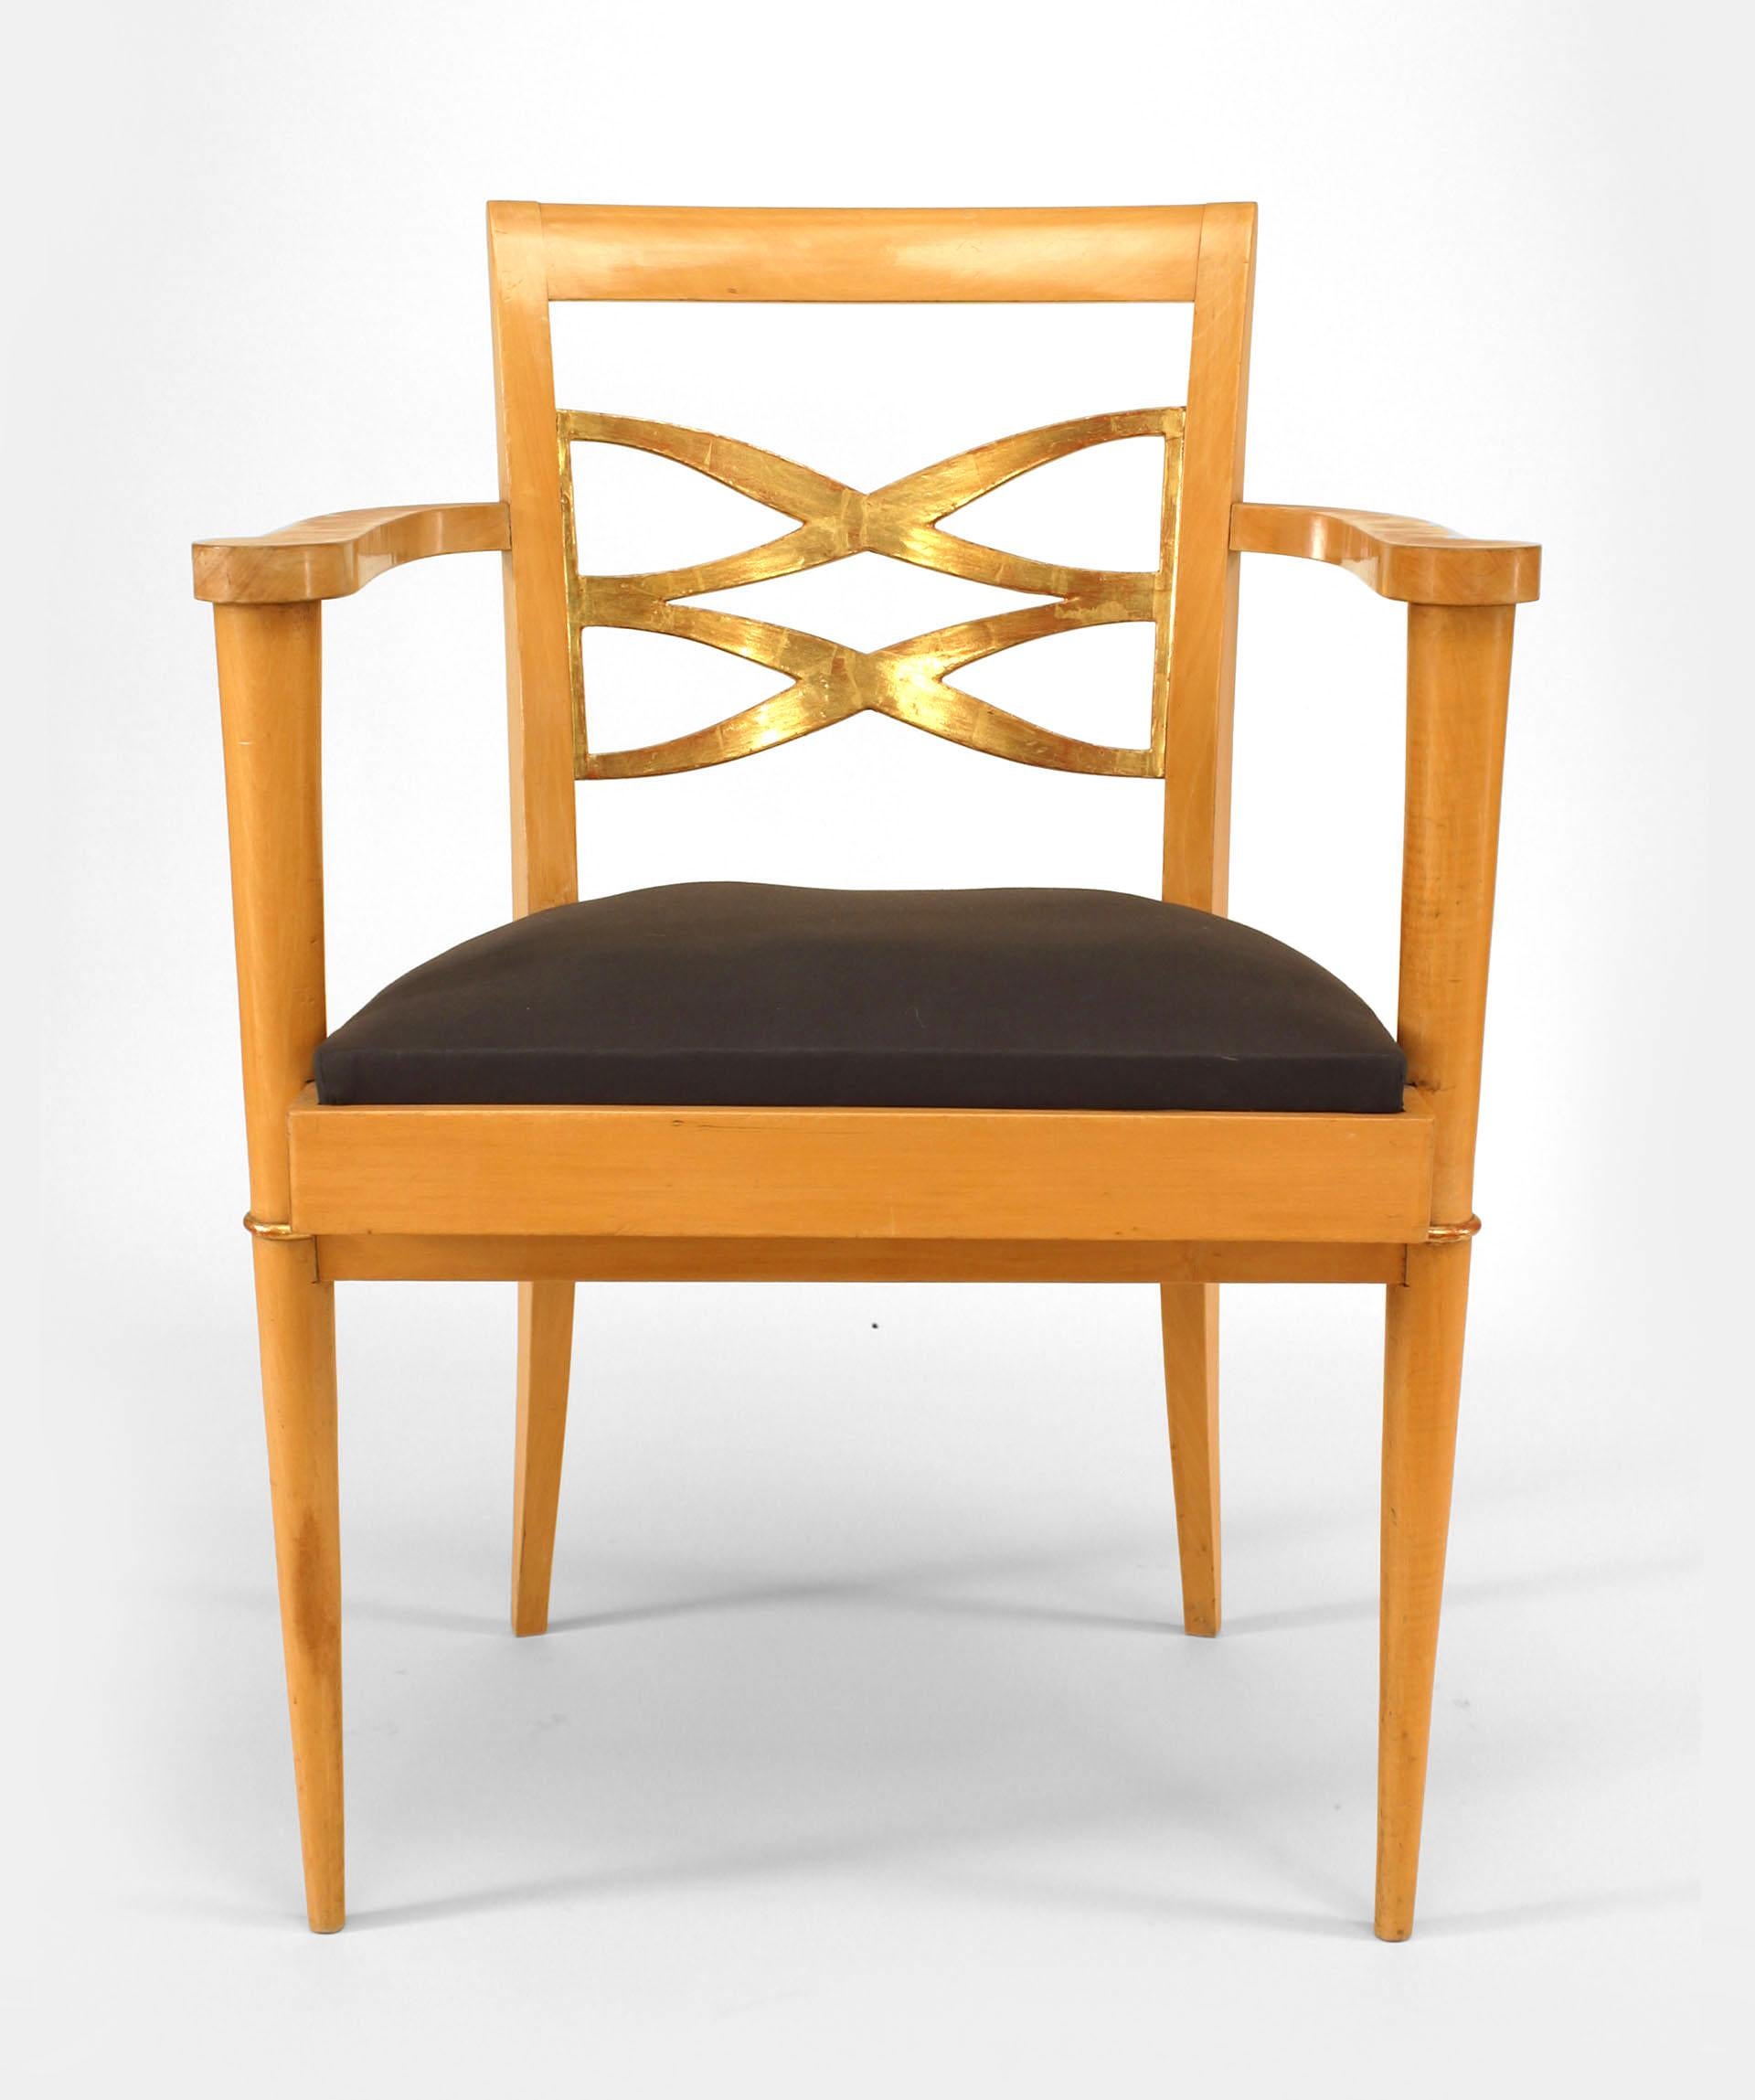 French 1940s sycamore arm chair with open design gilded back & trim and slip seat (att: BATISTIN SPADE)
